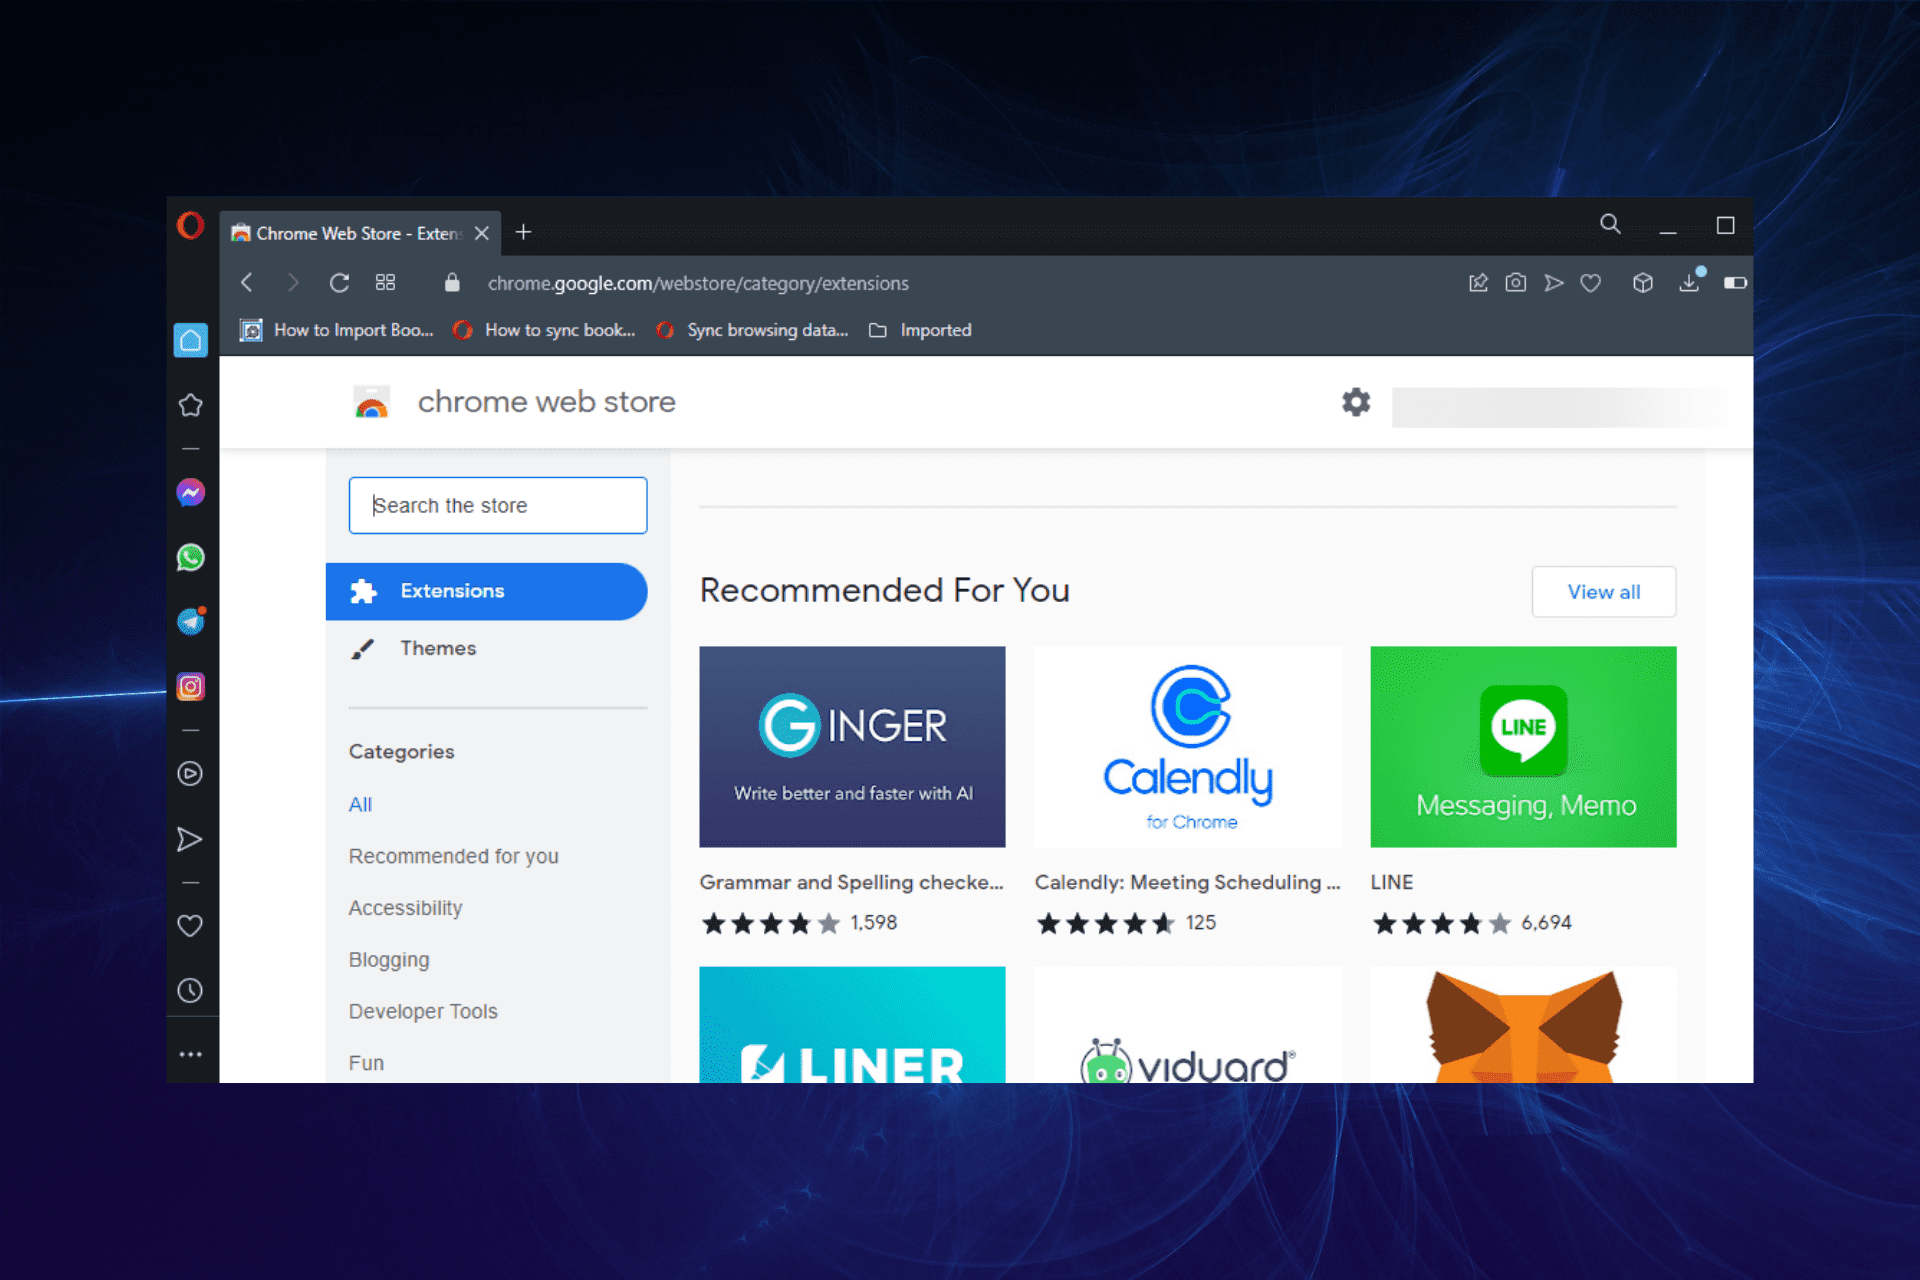 may i download chrome extensions on opera gx?